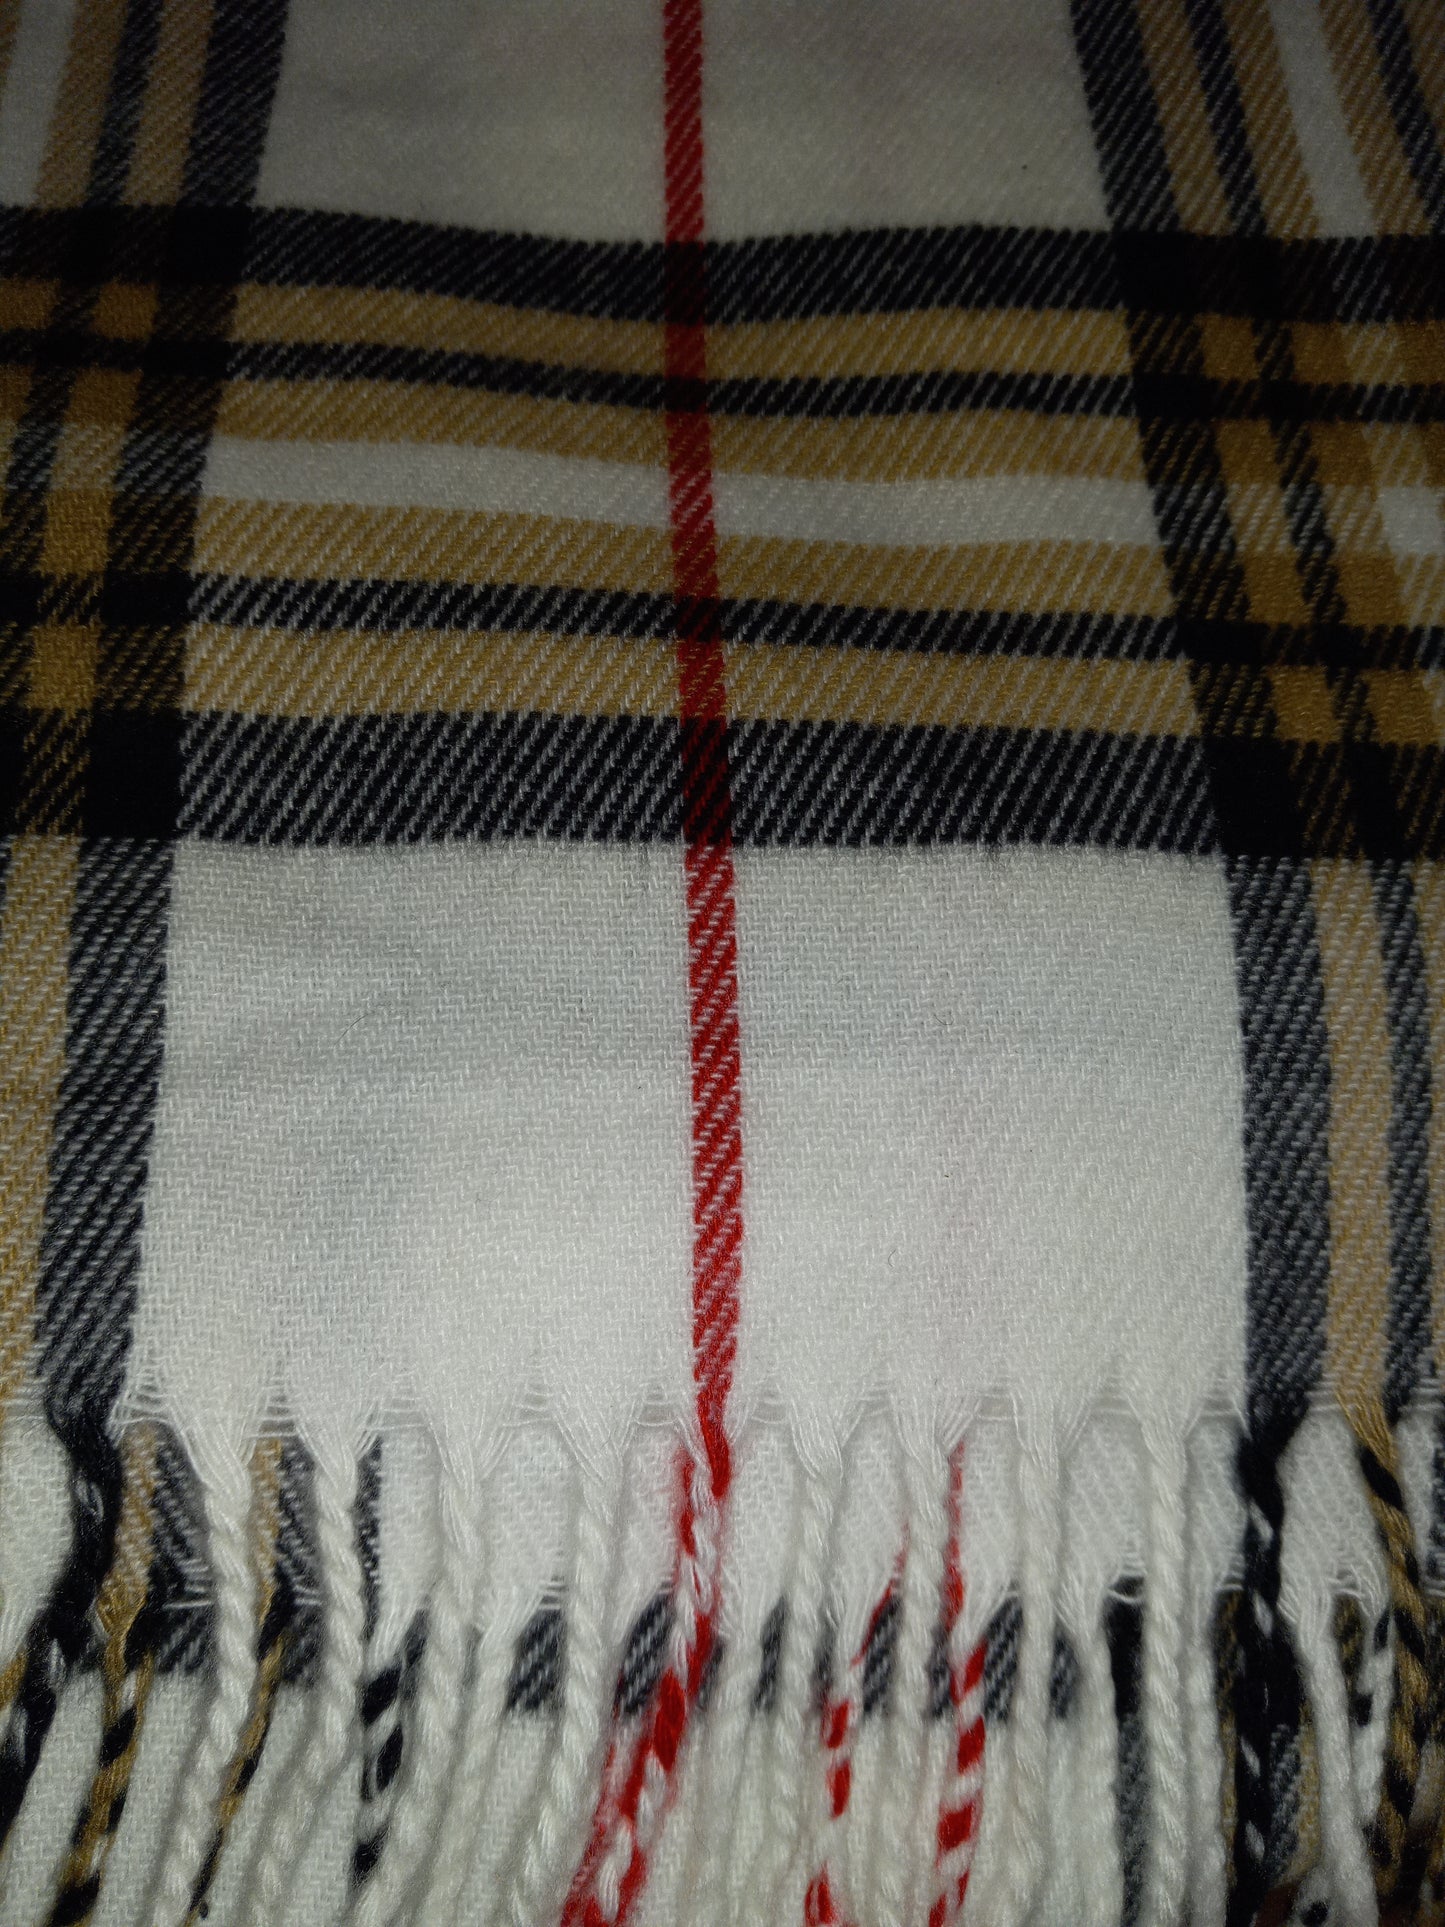 The Plaid Long Cashmere Scarf